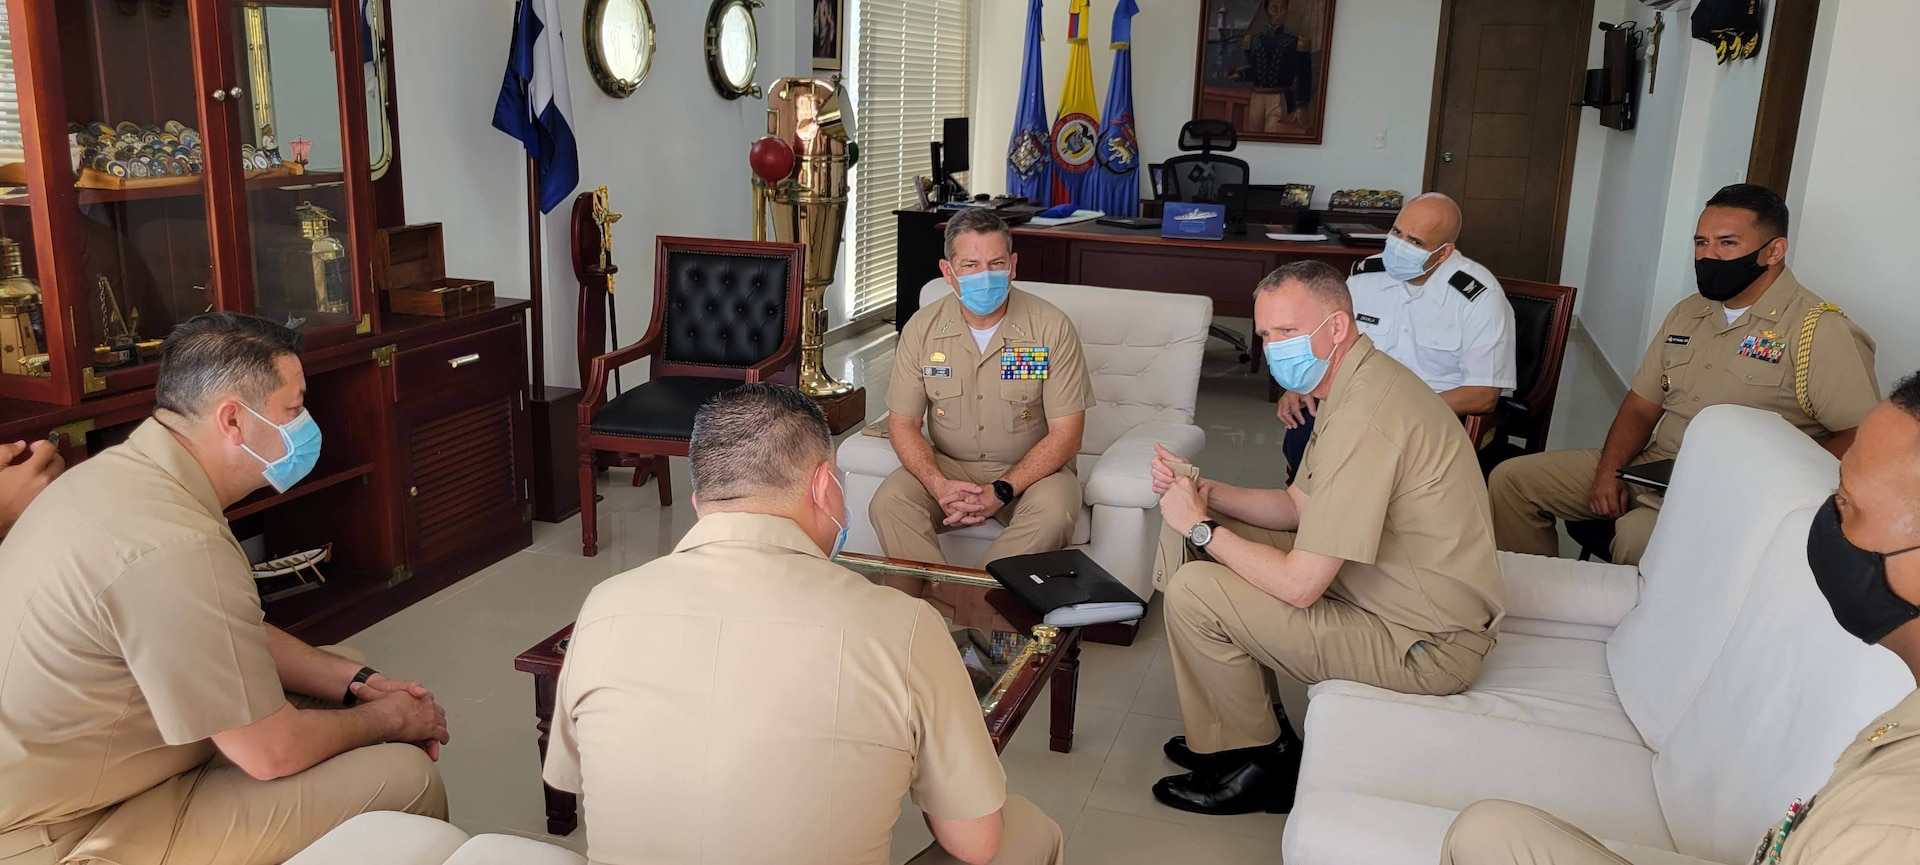 Rear Adm. Jim Aiken, Commander, U.S. Naval Forces Southern Command/U.S. 4th Fleet, visited Cartagena Jan. 16-19, 2022, to conduct key leader engagements and strengthen U.S. strategic partnership with the Colombian Navy.